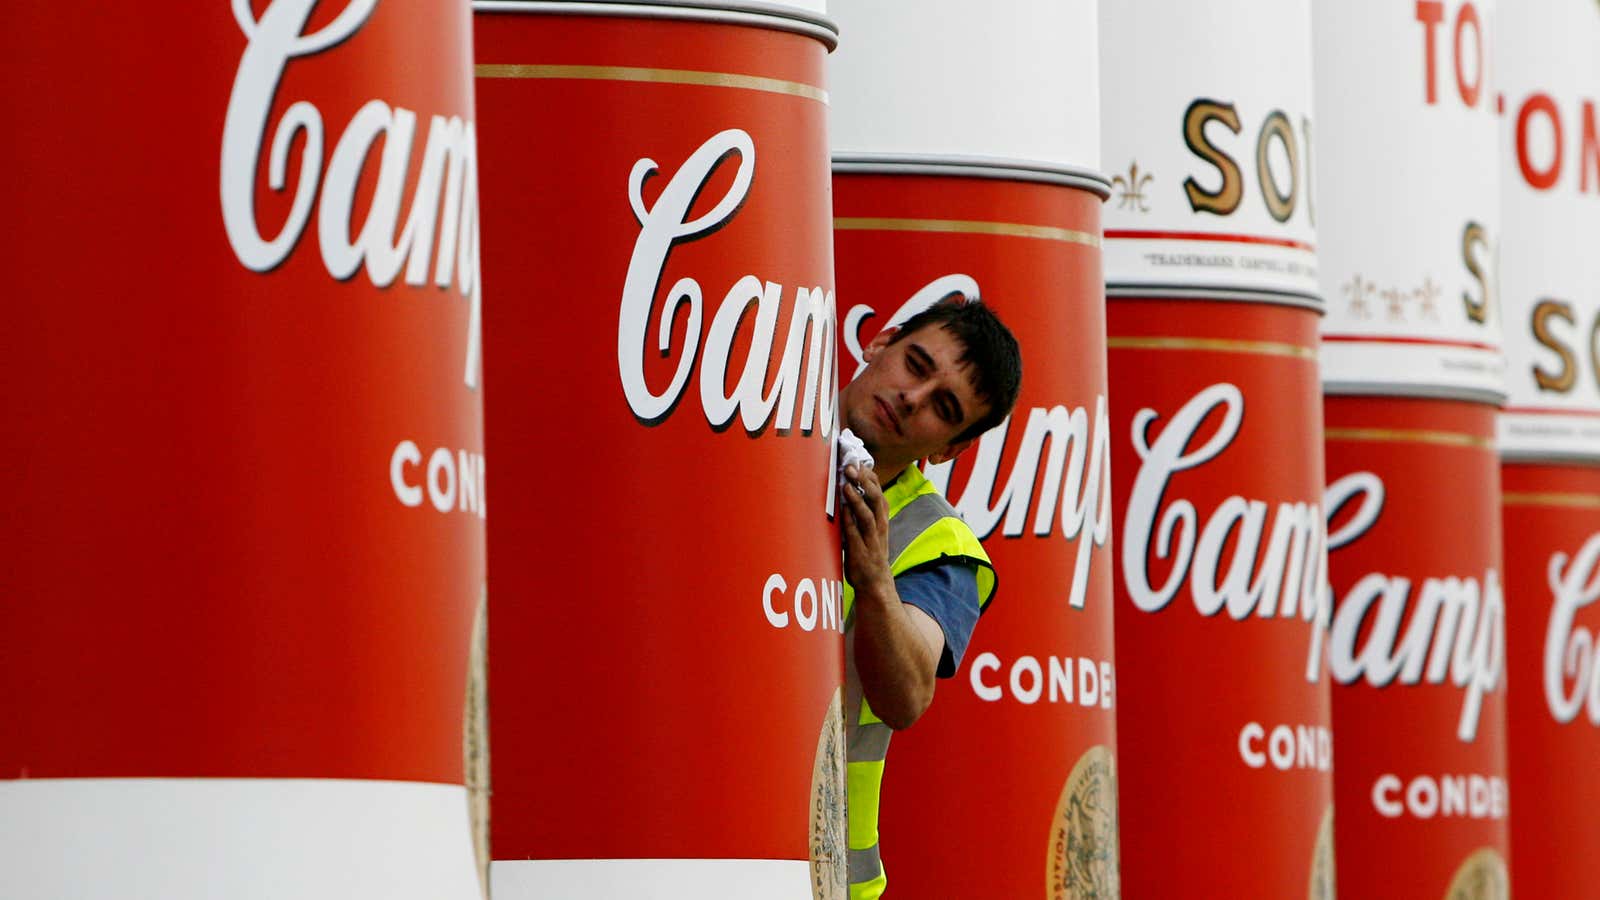 A workman wipes the main pillars of the National Gallery of Scotland complex, that were unveiled to show an Andy Warhol â€˜Campbellâ€™s Soup cansâ€™ artwork covering,  Edinburgh, Scotland July 31, 2007. The pillars were decorated to promote the Andy Warhol exhibition in Edinburgh which marks the 20th anniversary of the artistâ€™s death, and opens to the public on August 4.    REUTERS/David Moir   (BRITAIN)